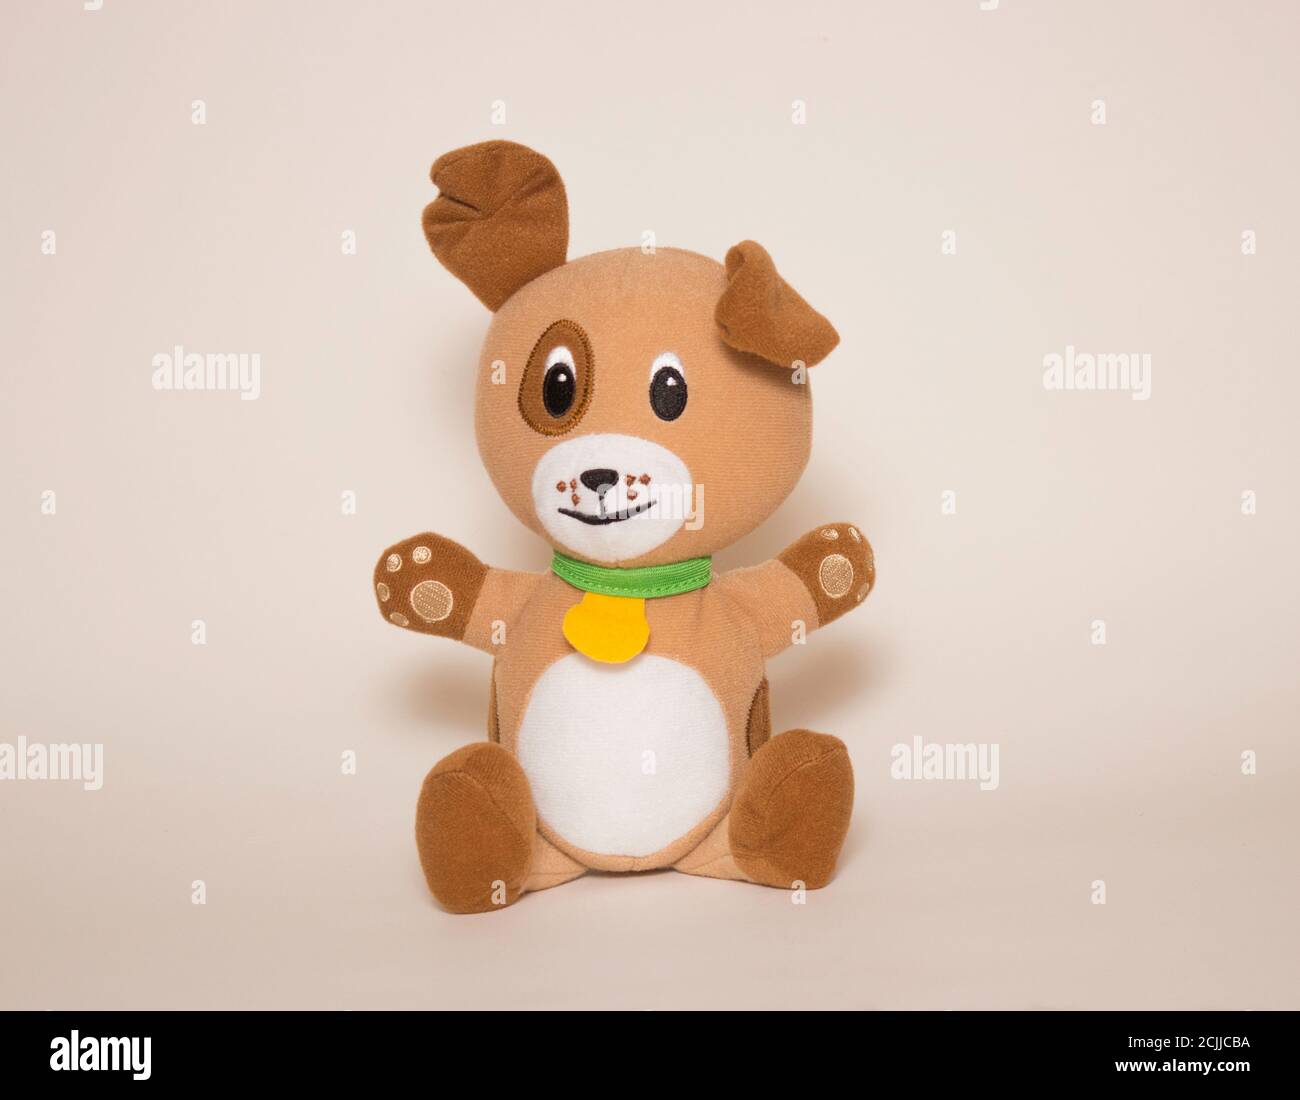 A toy brown dog sits on a white background. Toys for children, soft plush animals. Stock Photo